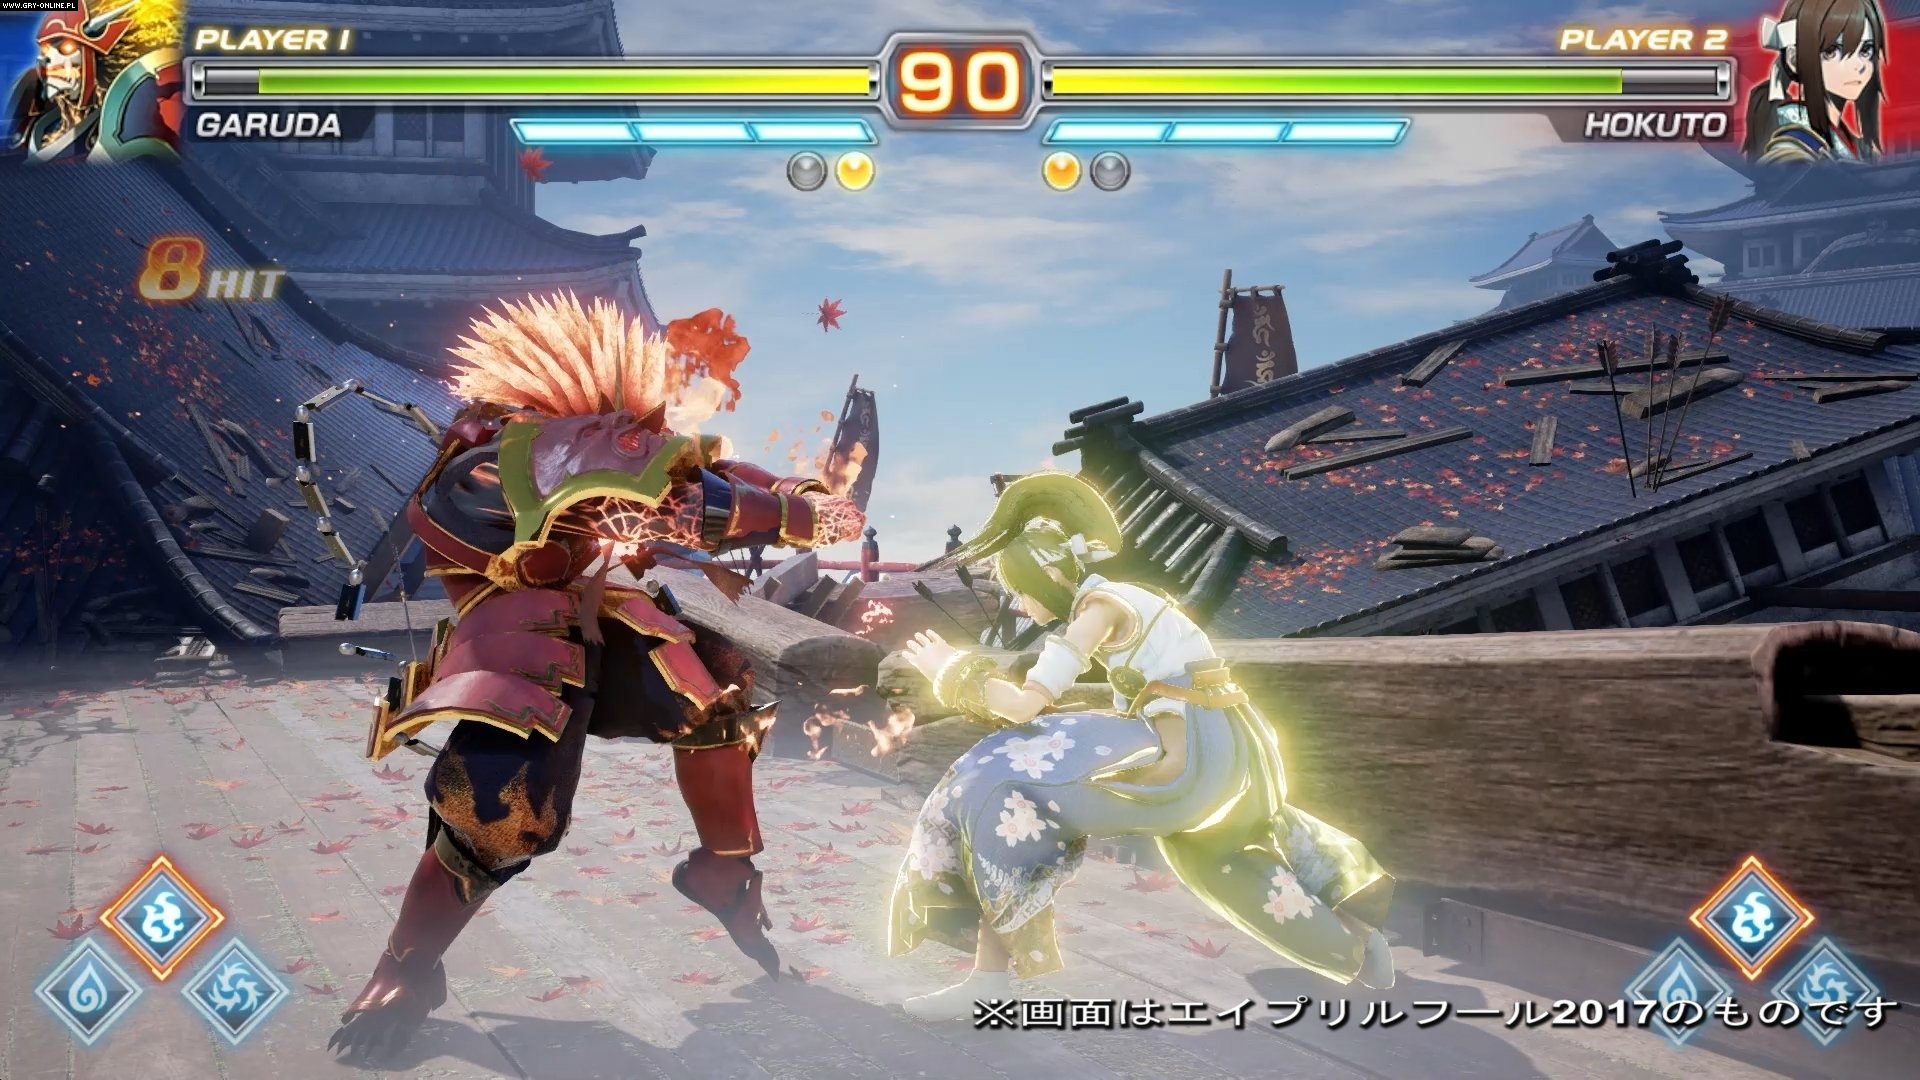 Toyota fight чит. Fighting ex layer. Ex layer файтинг. Fighting ex layer ФРН. Fighting ex layer another Dash.